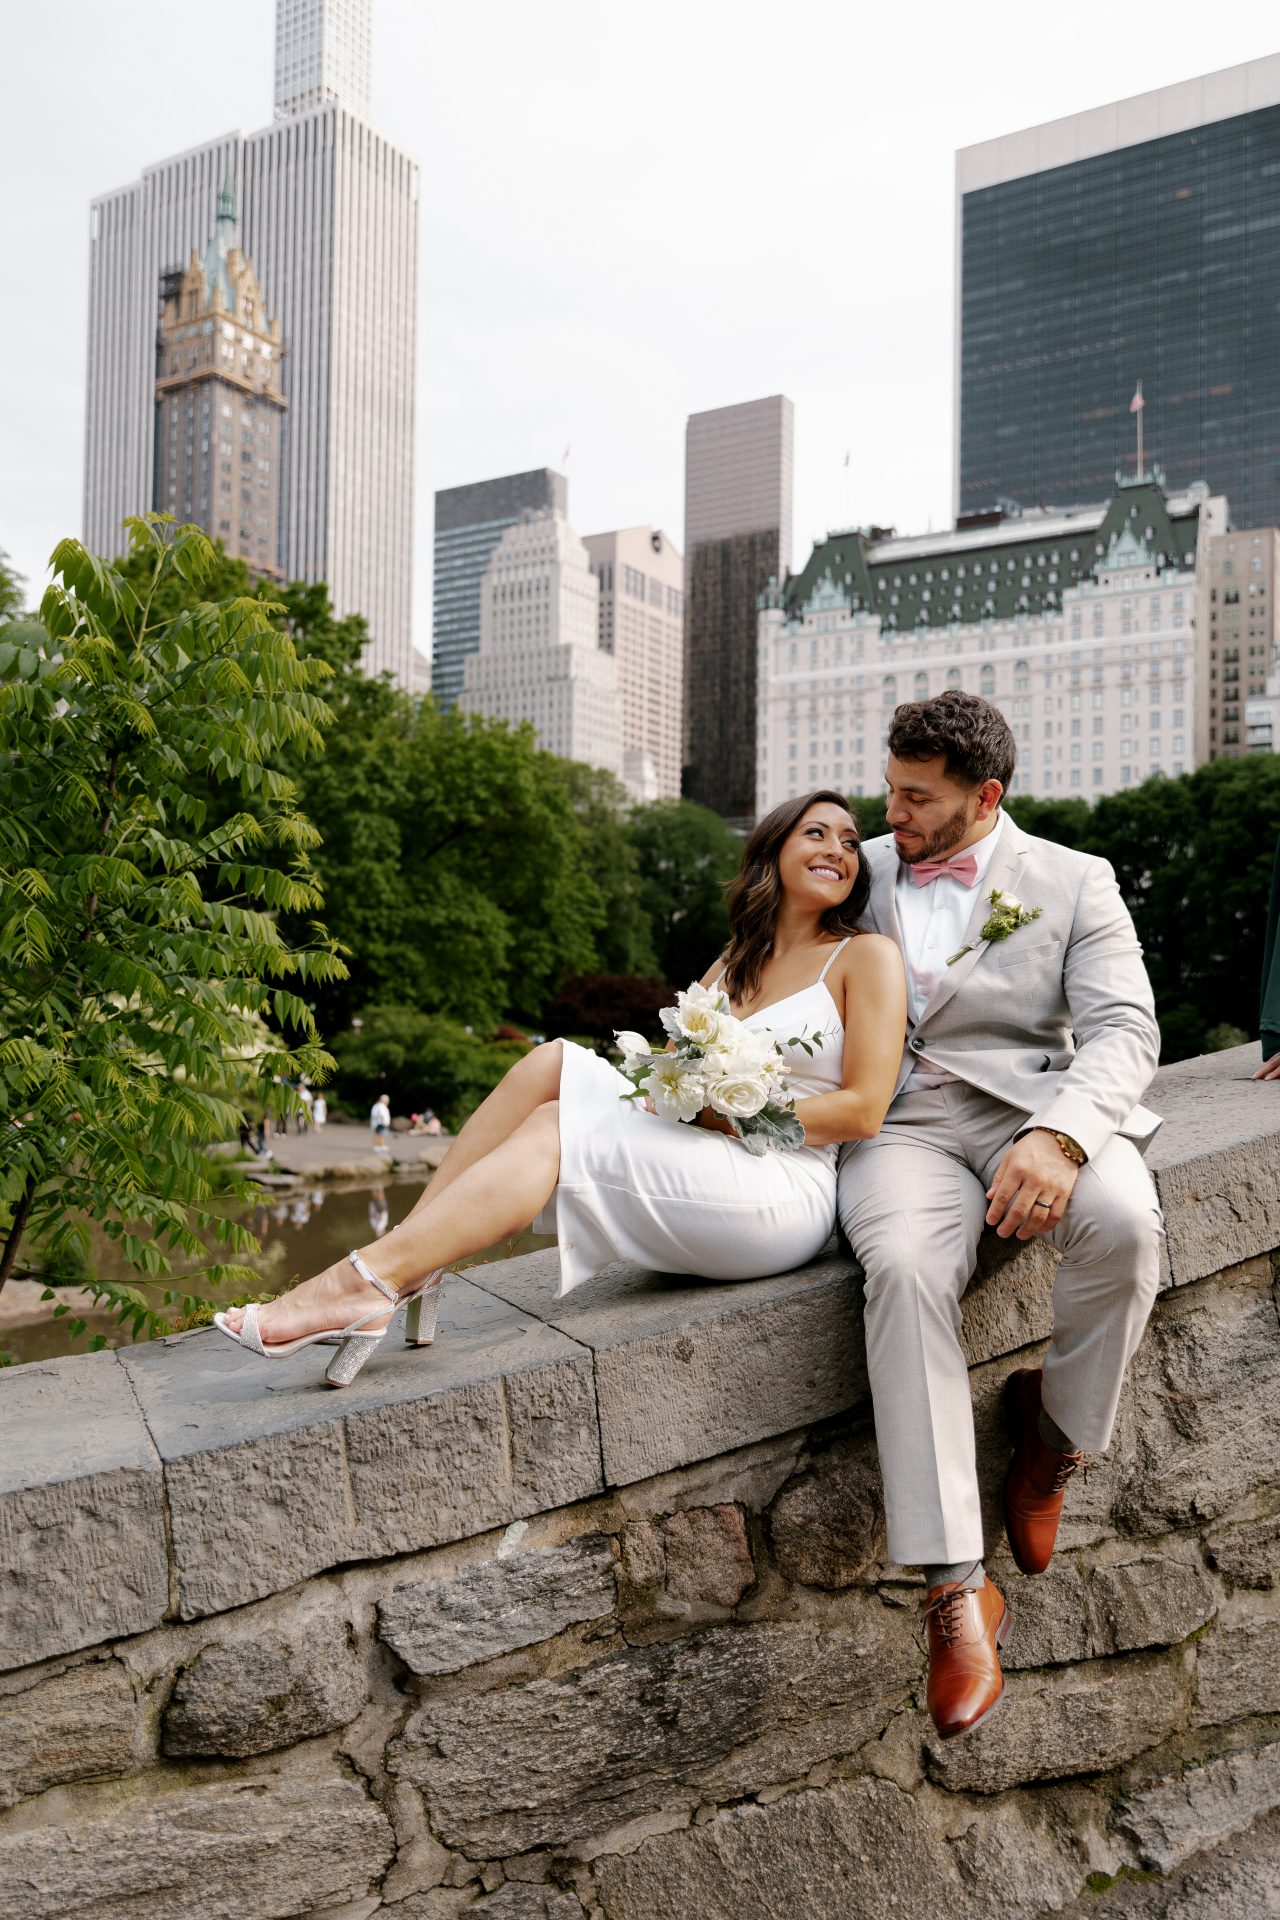 Simple wedding in Central Park NY 23